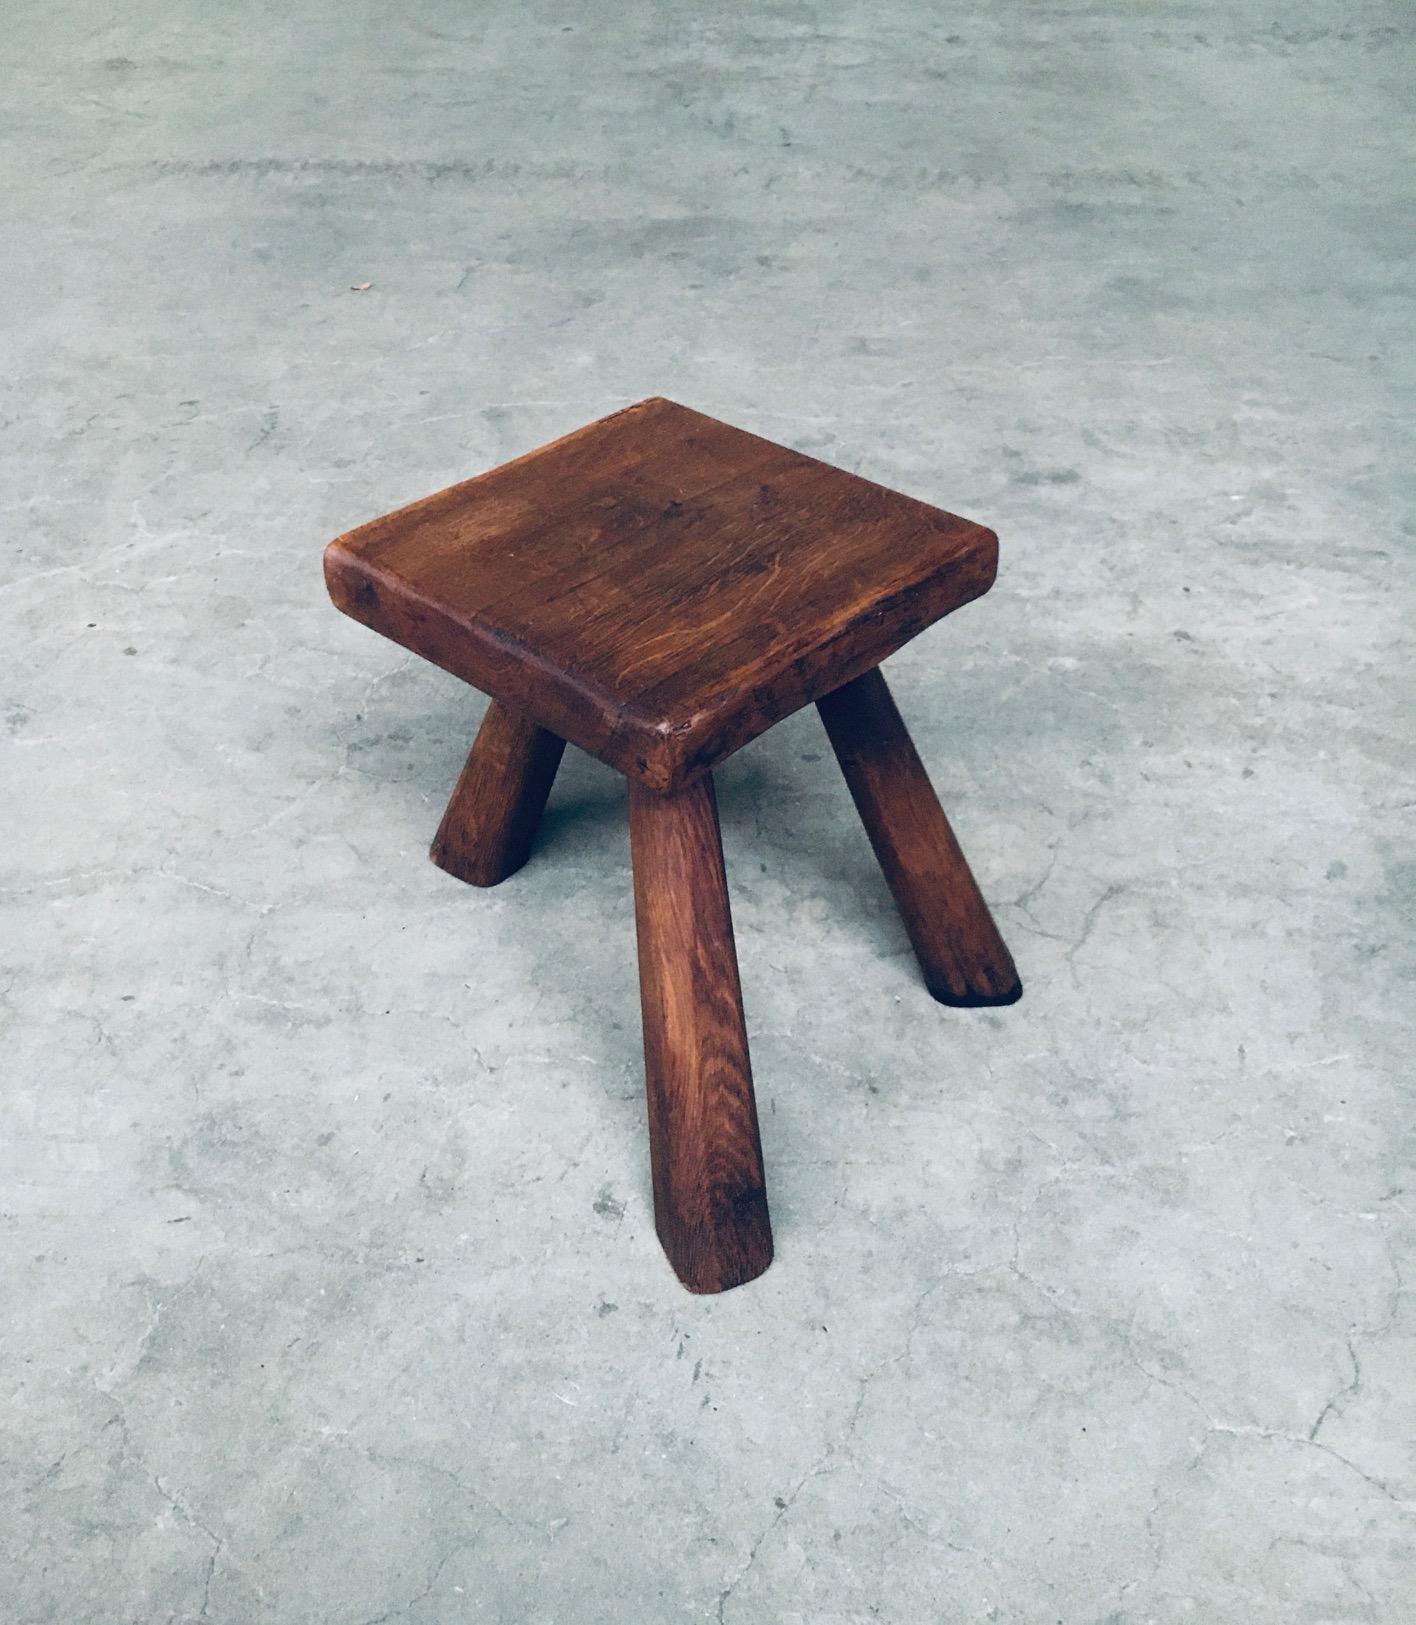 Vintage Tripod Oak Small Side Table / Stool. Made in Belgium, 1950's. Solid oak constructed handmade hand carved stool or side table. This comes in very good condition, with a nice darker patina. Measures 32cm x 39cm x 34cm.